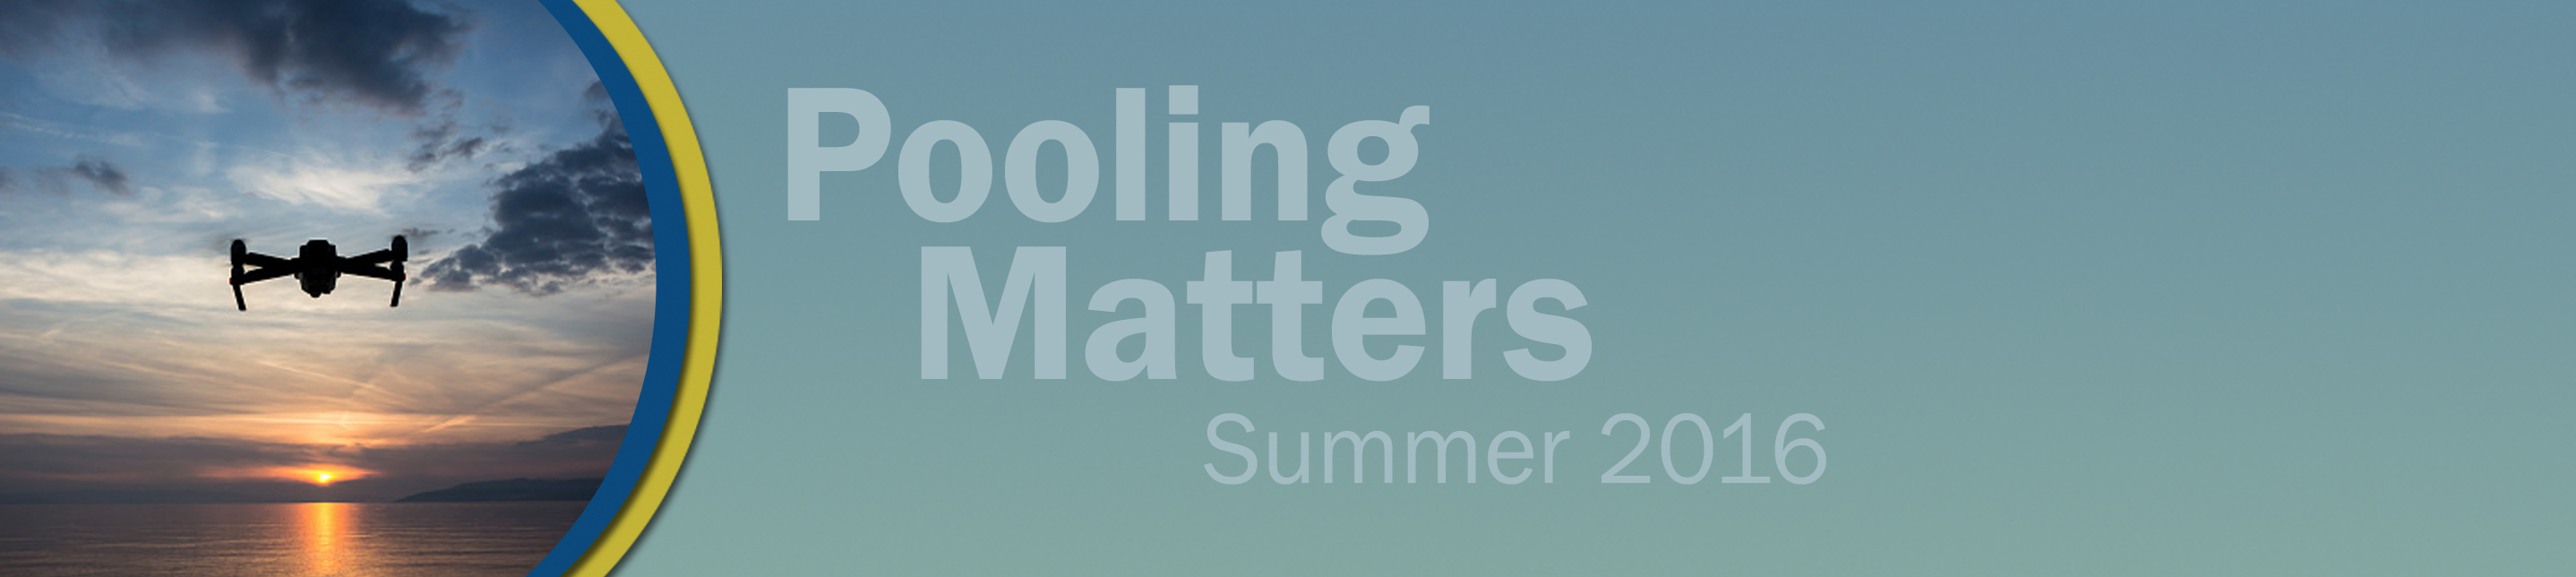 Pooling Matters: 2016 Summer Issue